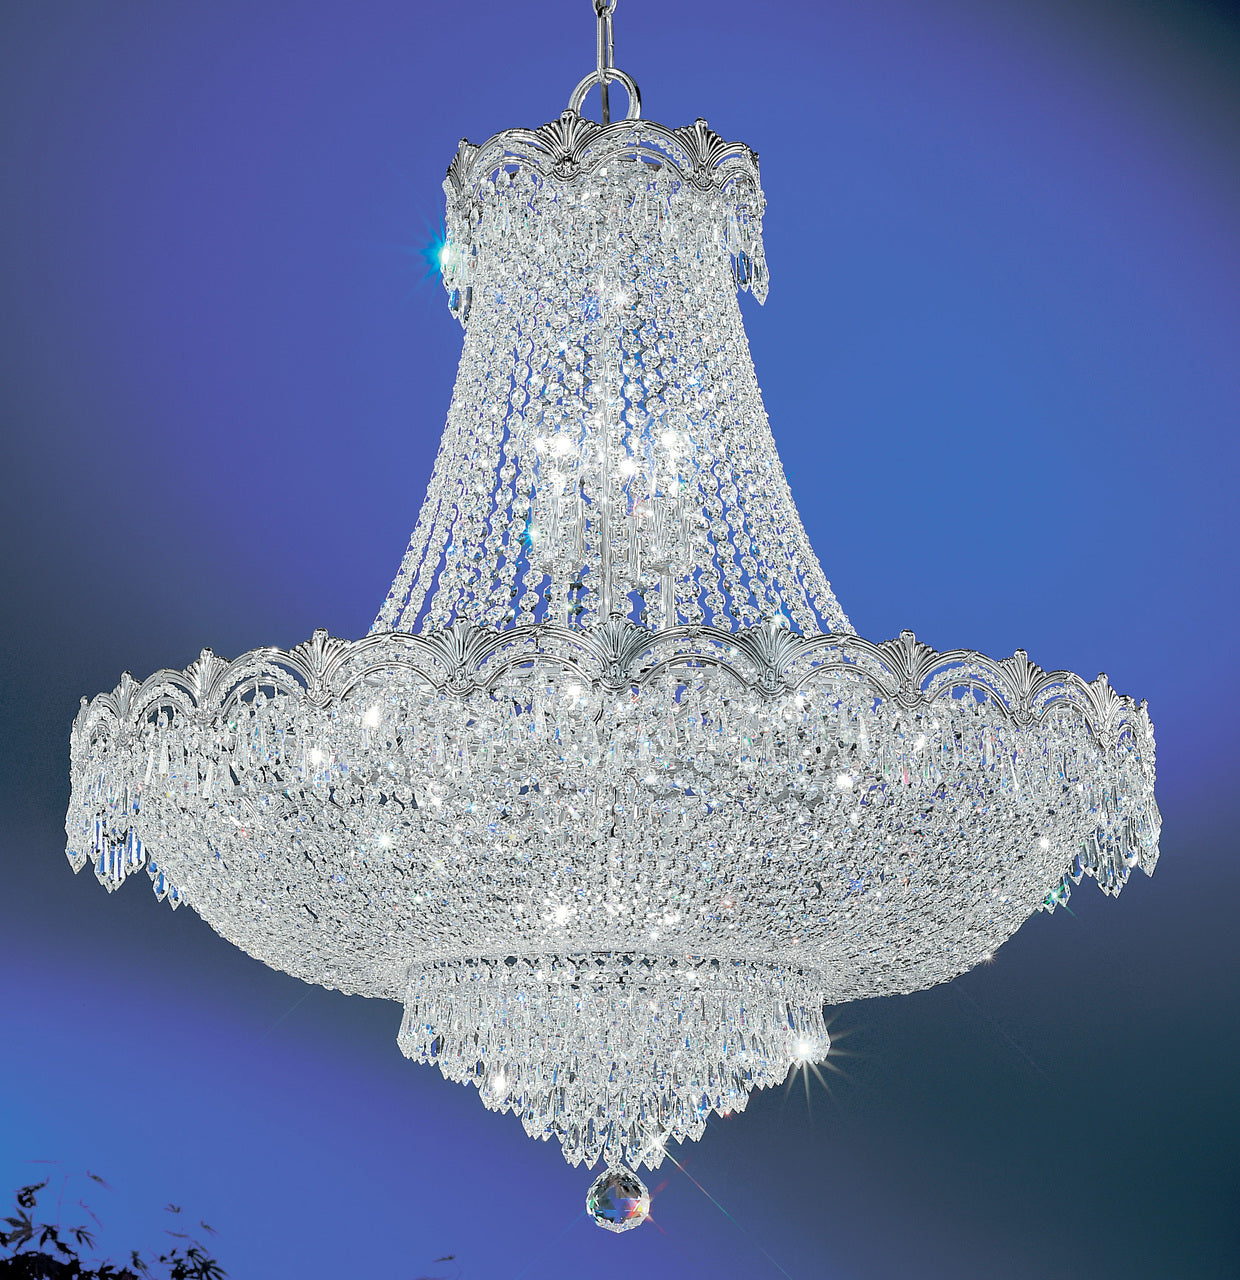 Classic Lighting 1858 CHB SC Regency II Crystal Chandelier in Chrome/Black Patina (Imported from Spain)